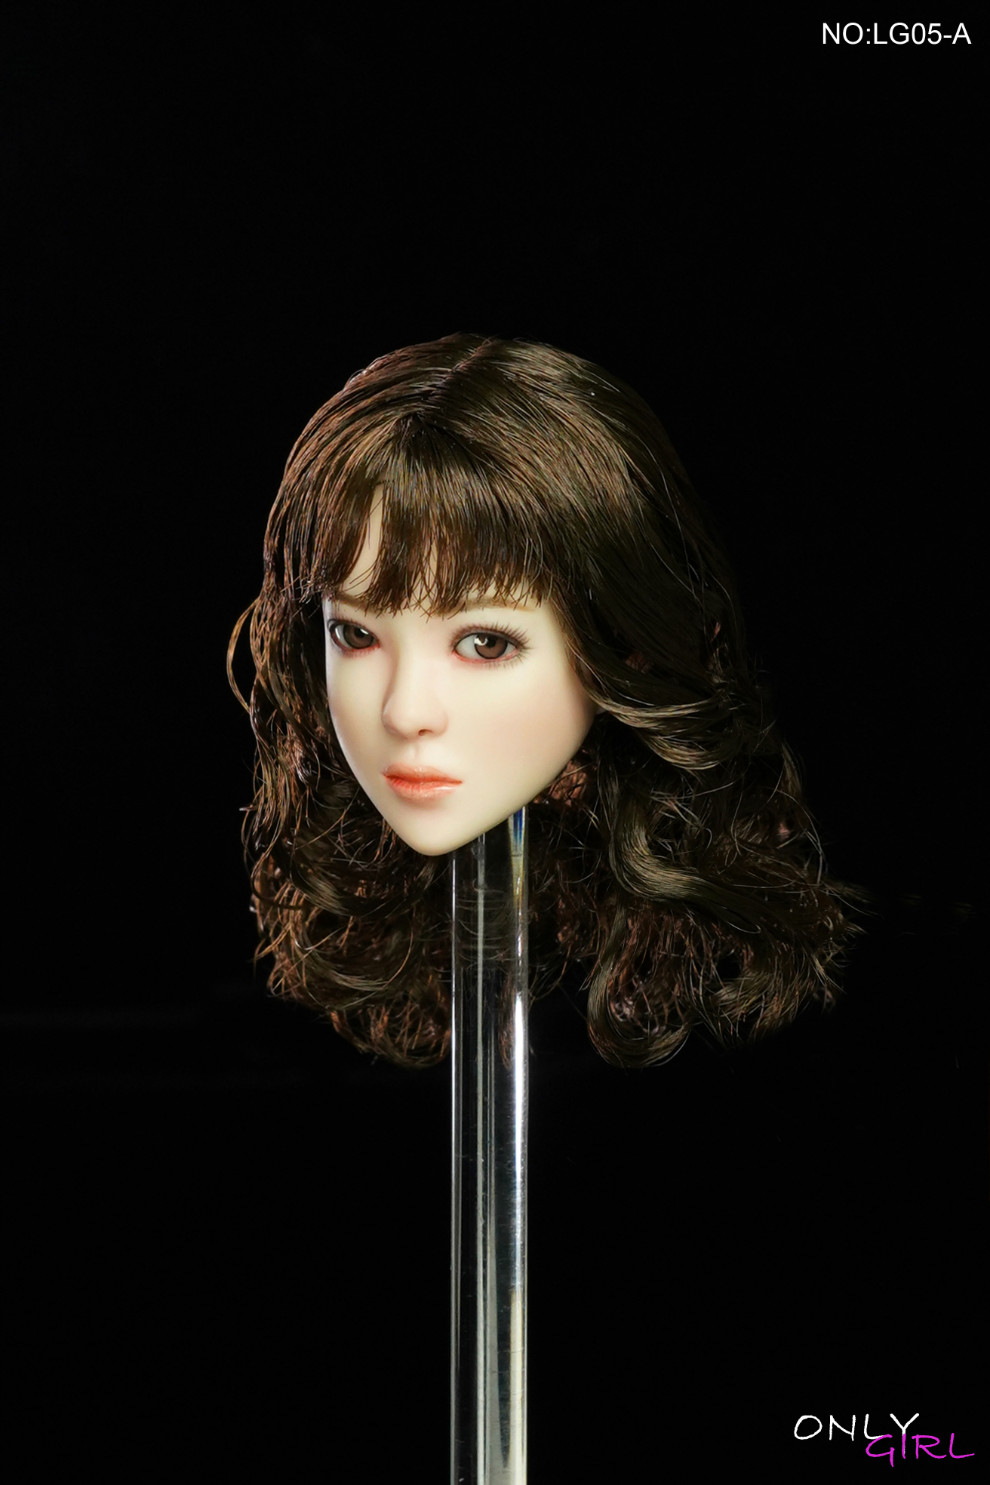 NEW PRODUCT: ONLYGIRL: 1/6 LG05 movable eye female head carving - ABC three models 4196